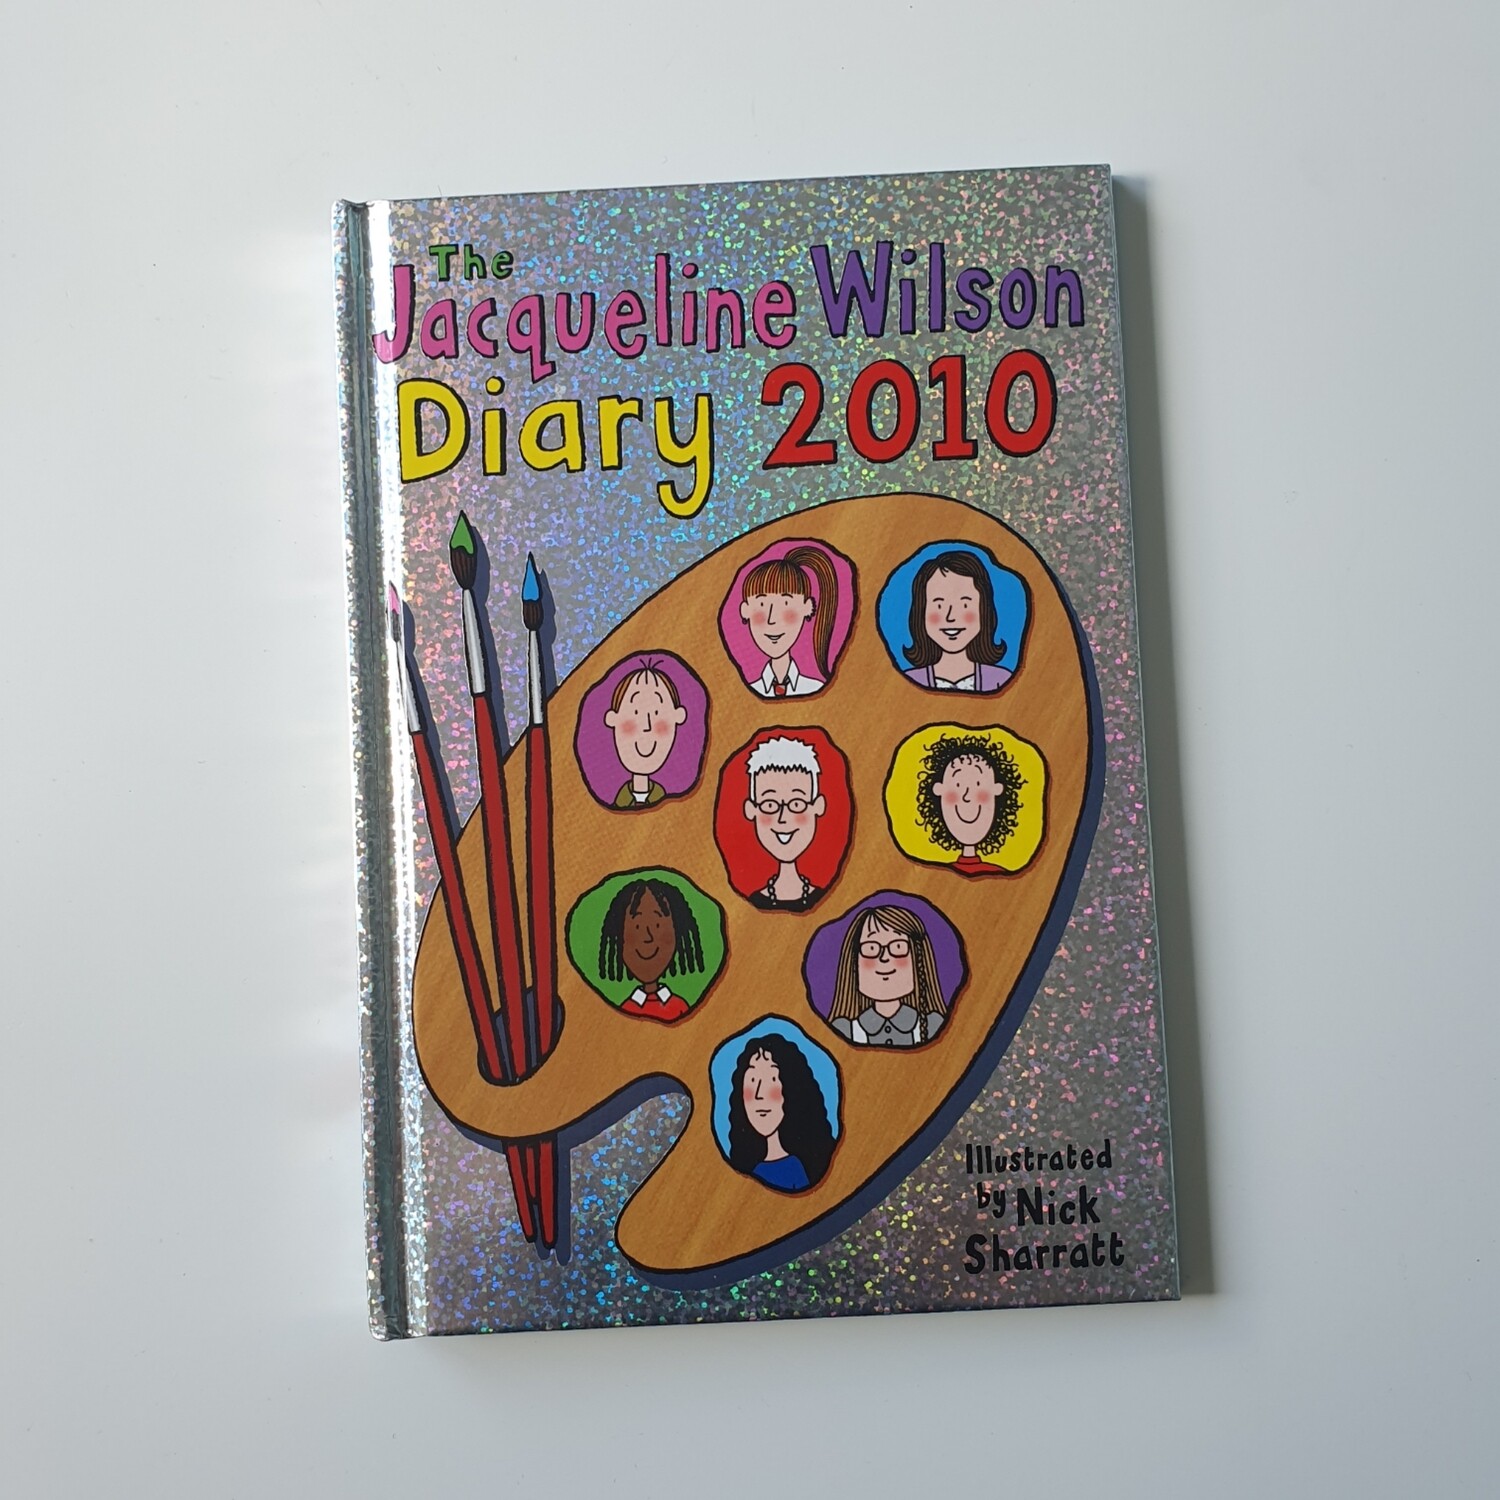 Jacqueline Wilson - choose from a variety of books